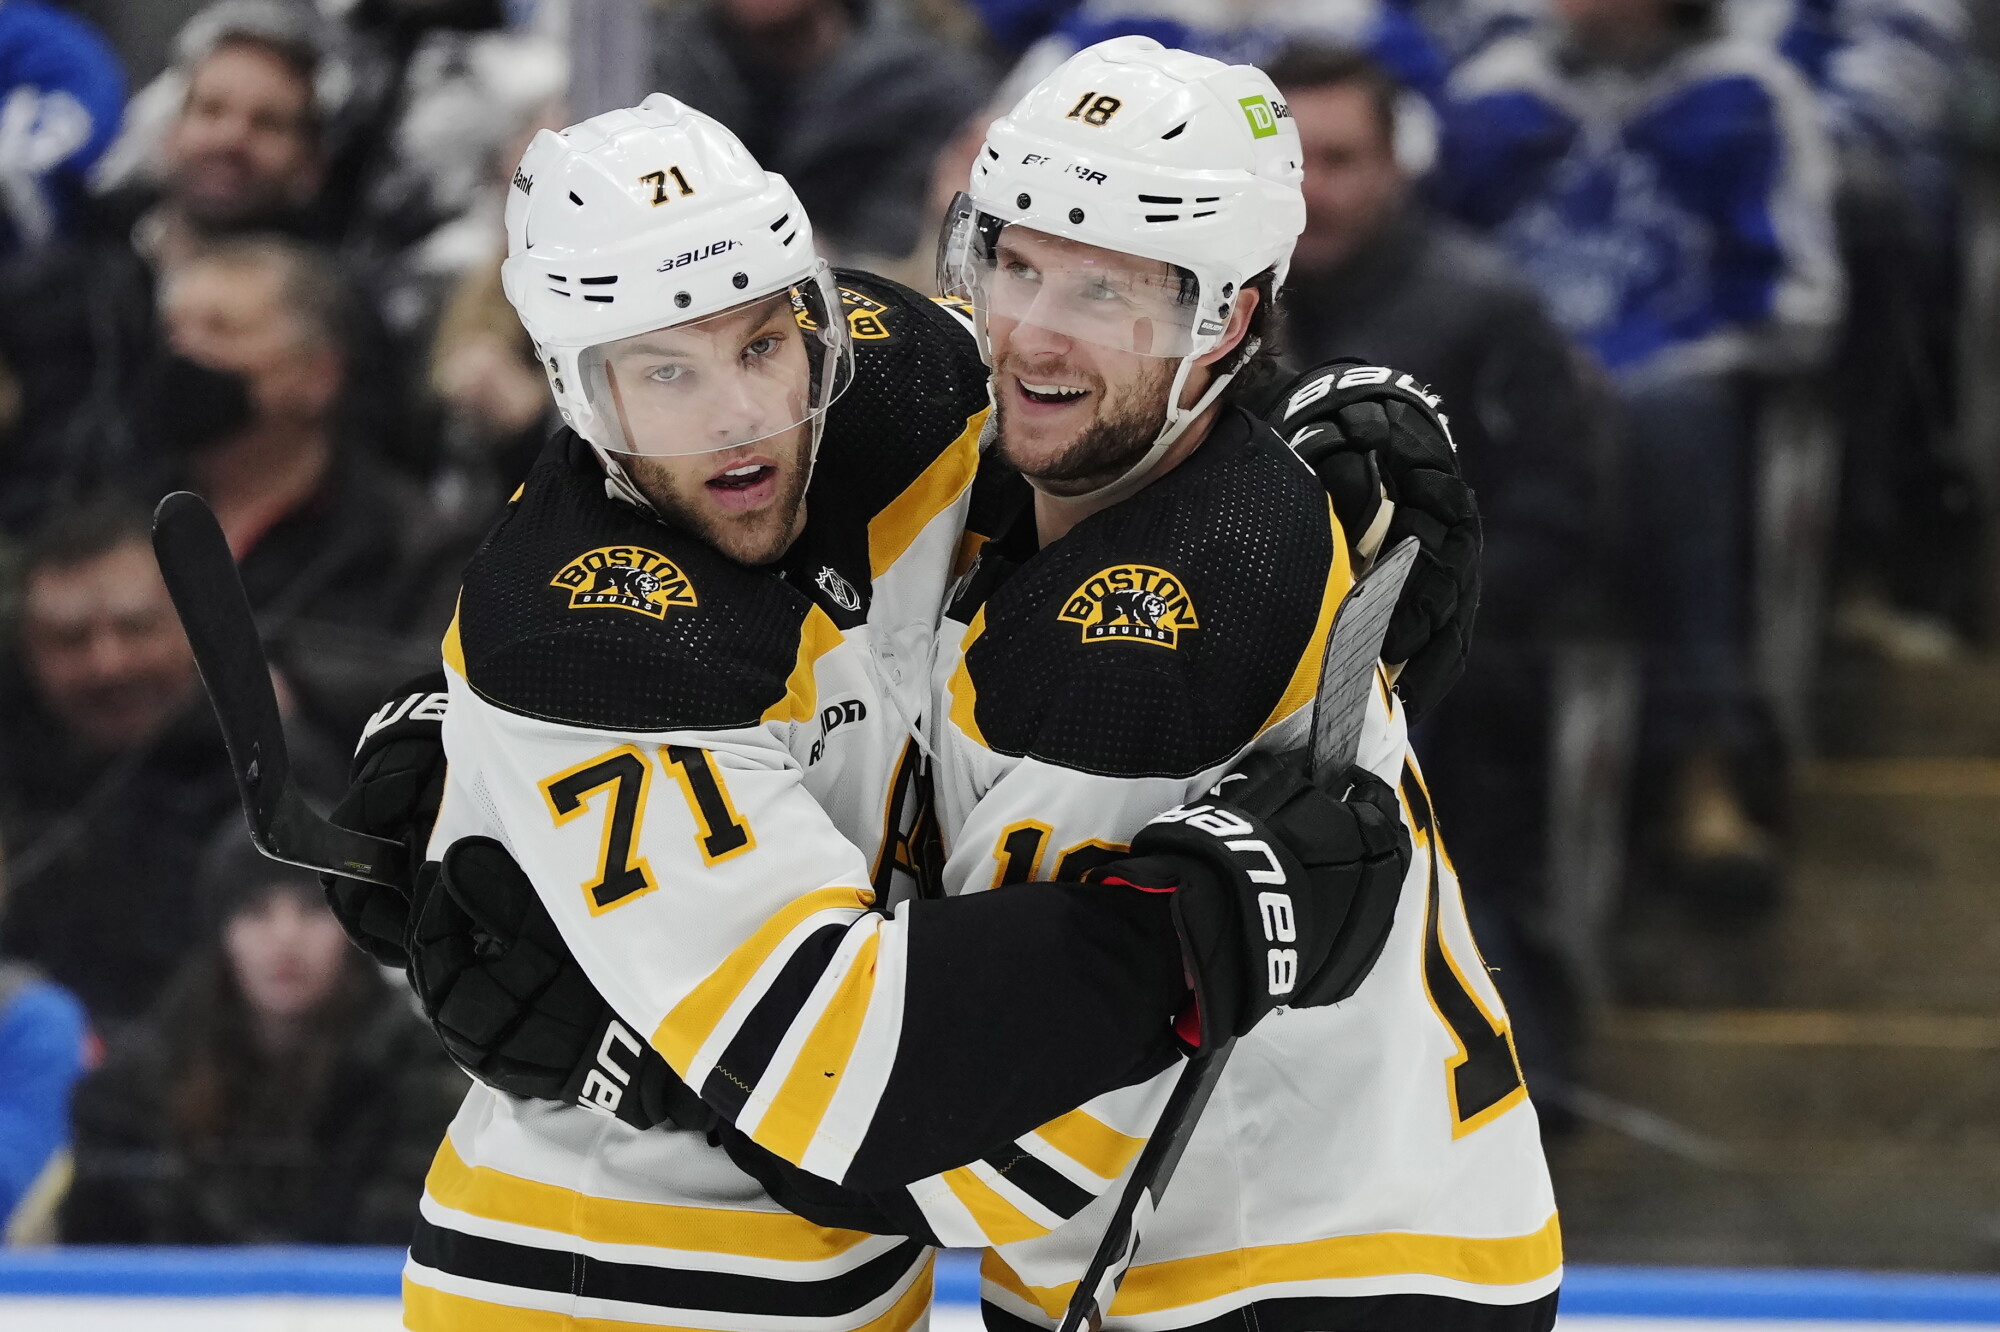 Wednesday's NHL: Pastrnak scores twice, Bruins beat Maple Leafs to